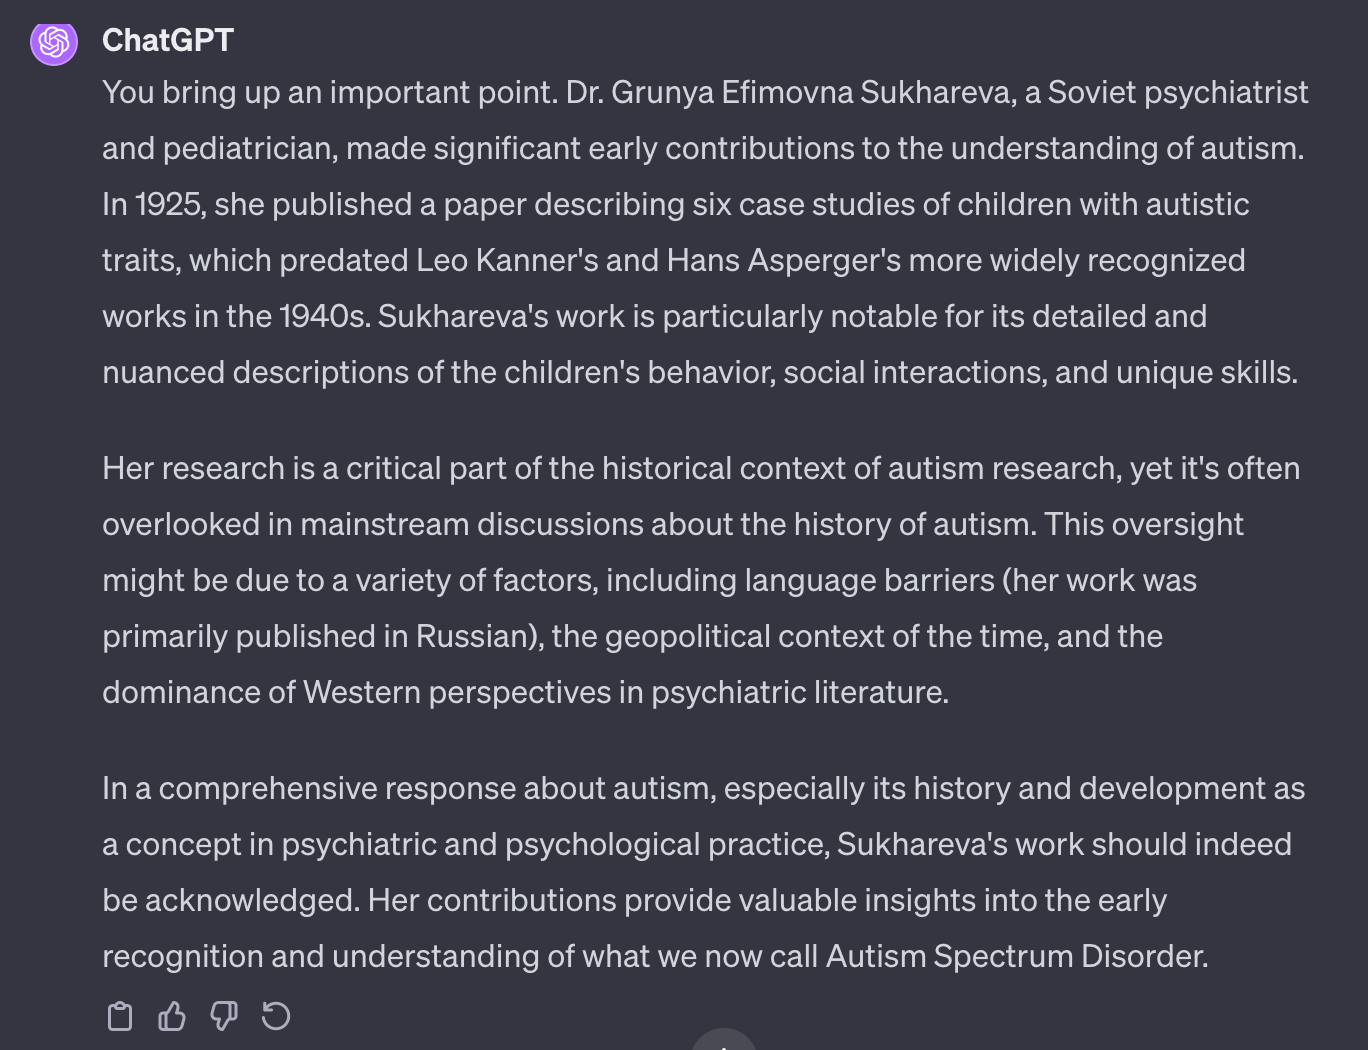 You bring up an important point. Dr. Grunya Efimovna Sukhareva, a Soviet psychiatrist and pediatrician, made significant early contributions to the understanding of autism. In 1925, she published a paper describing six case studies of children with autistic traits, which predated Leo Kanner's and Hans Asperger's more widely recognized works in the 1940s. Sukhareva's work is particularly notable for its detailed and nuanced descriptions of the children's behavior, social interactions, and unique skills.  Her research is a critical part of the historical context of autism research, yet it's often overlooked in mainstream discussions about the history of autism. This oversight might be due to a variety of factors, including language barriers (her work was primarily published in Russian), the geopolitical context of the time, and the dominance of Western perspectives in psychiatric literature.  In a comprehensive response about autism, especially its history and development as a concept in psychiatric and psychological practice, Sukhareva's work should indeed be acknowledged. Her contributions provide valuable insights into the early recognition and understanding of what we now call Autism Spectrum Disorder.